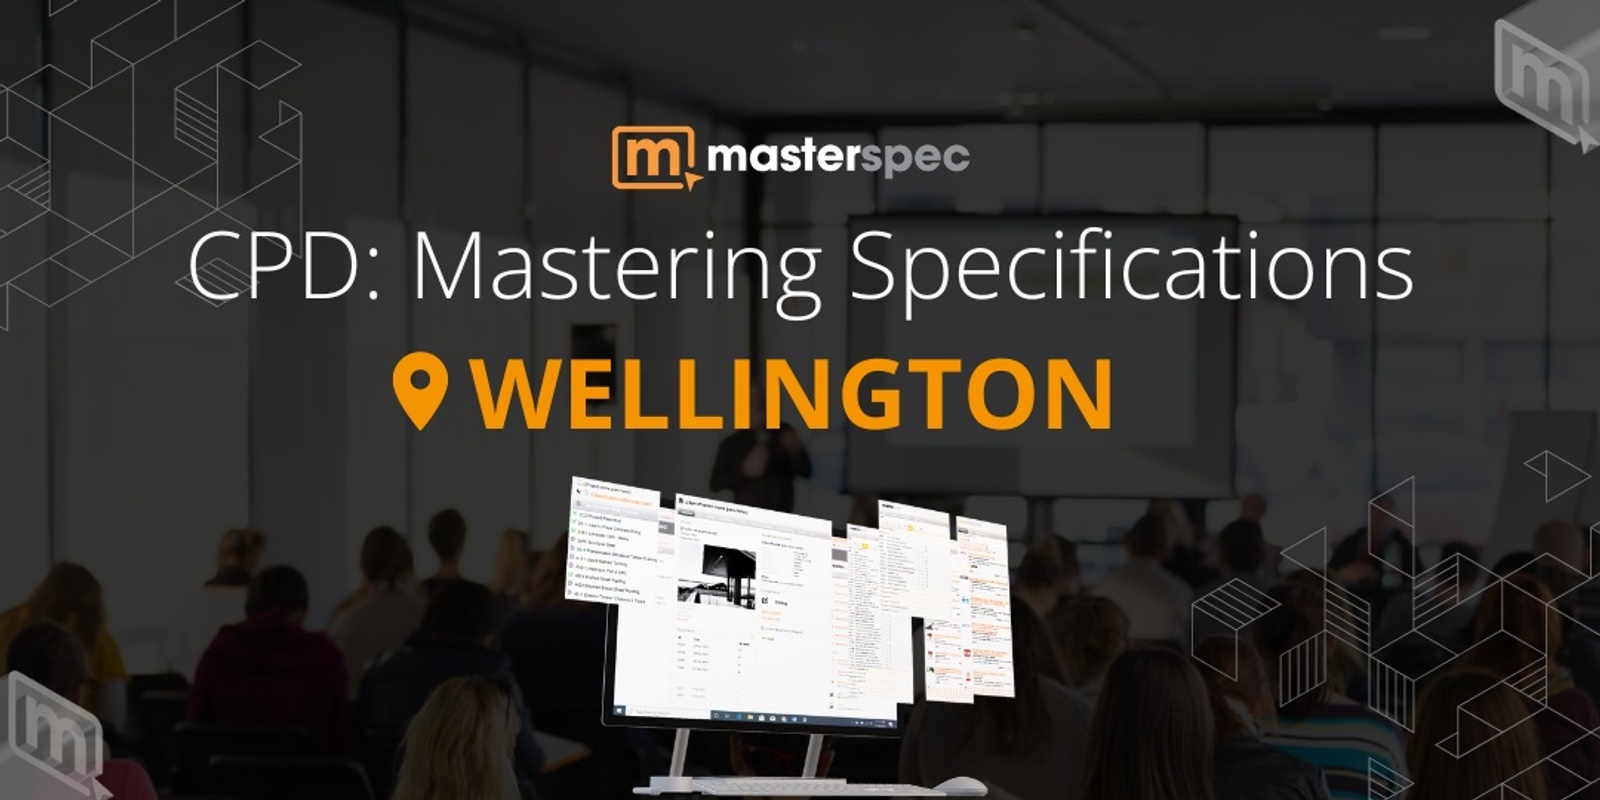 Banner image for CPD: Mastering Masterspec Specifications WELLINGTON | ⭐ 20 CPD Points